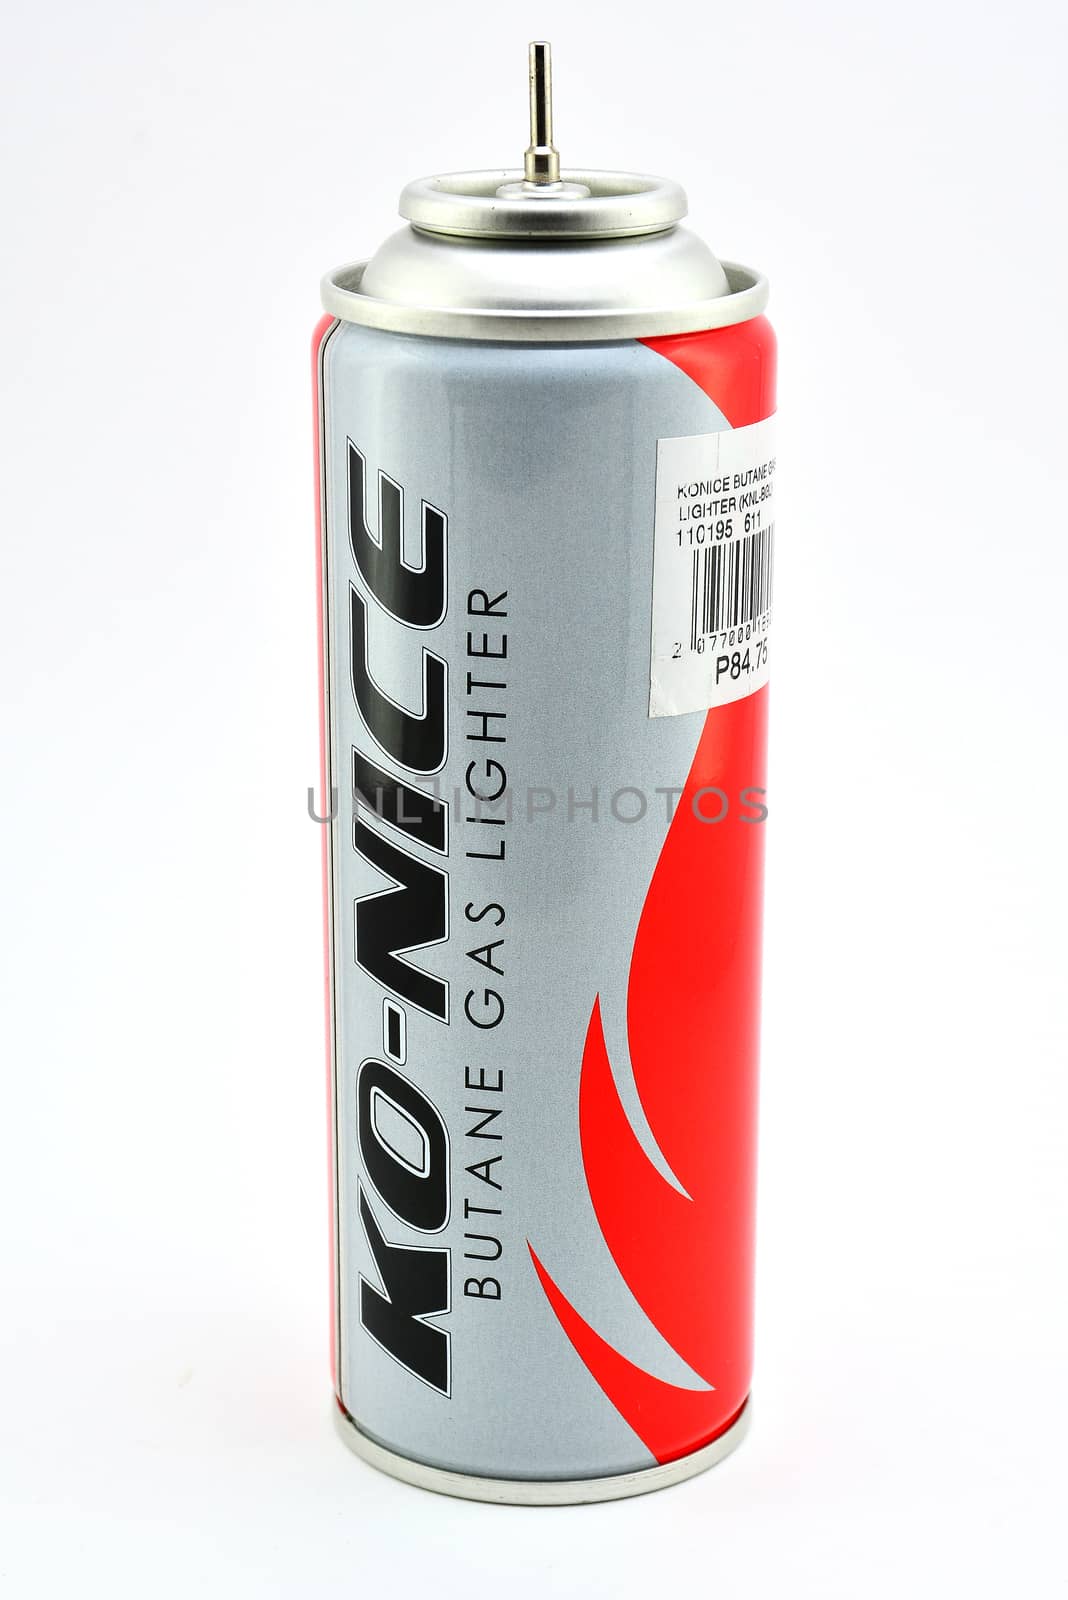 Konice butane gas lighter can in Philippines by imwaltersy